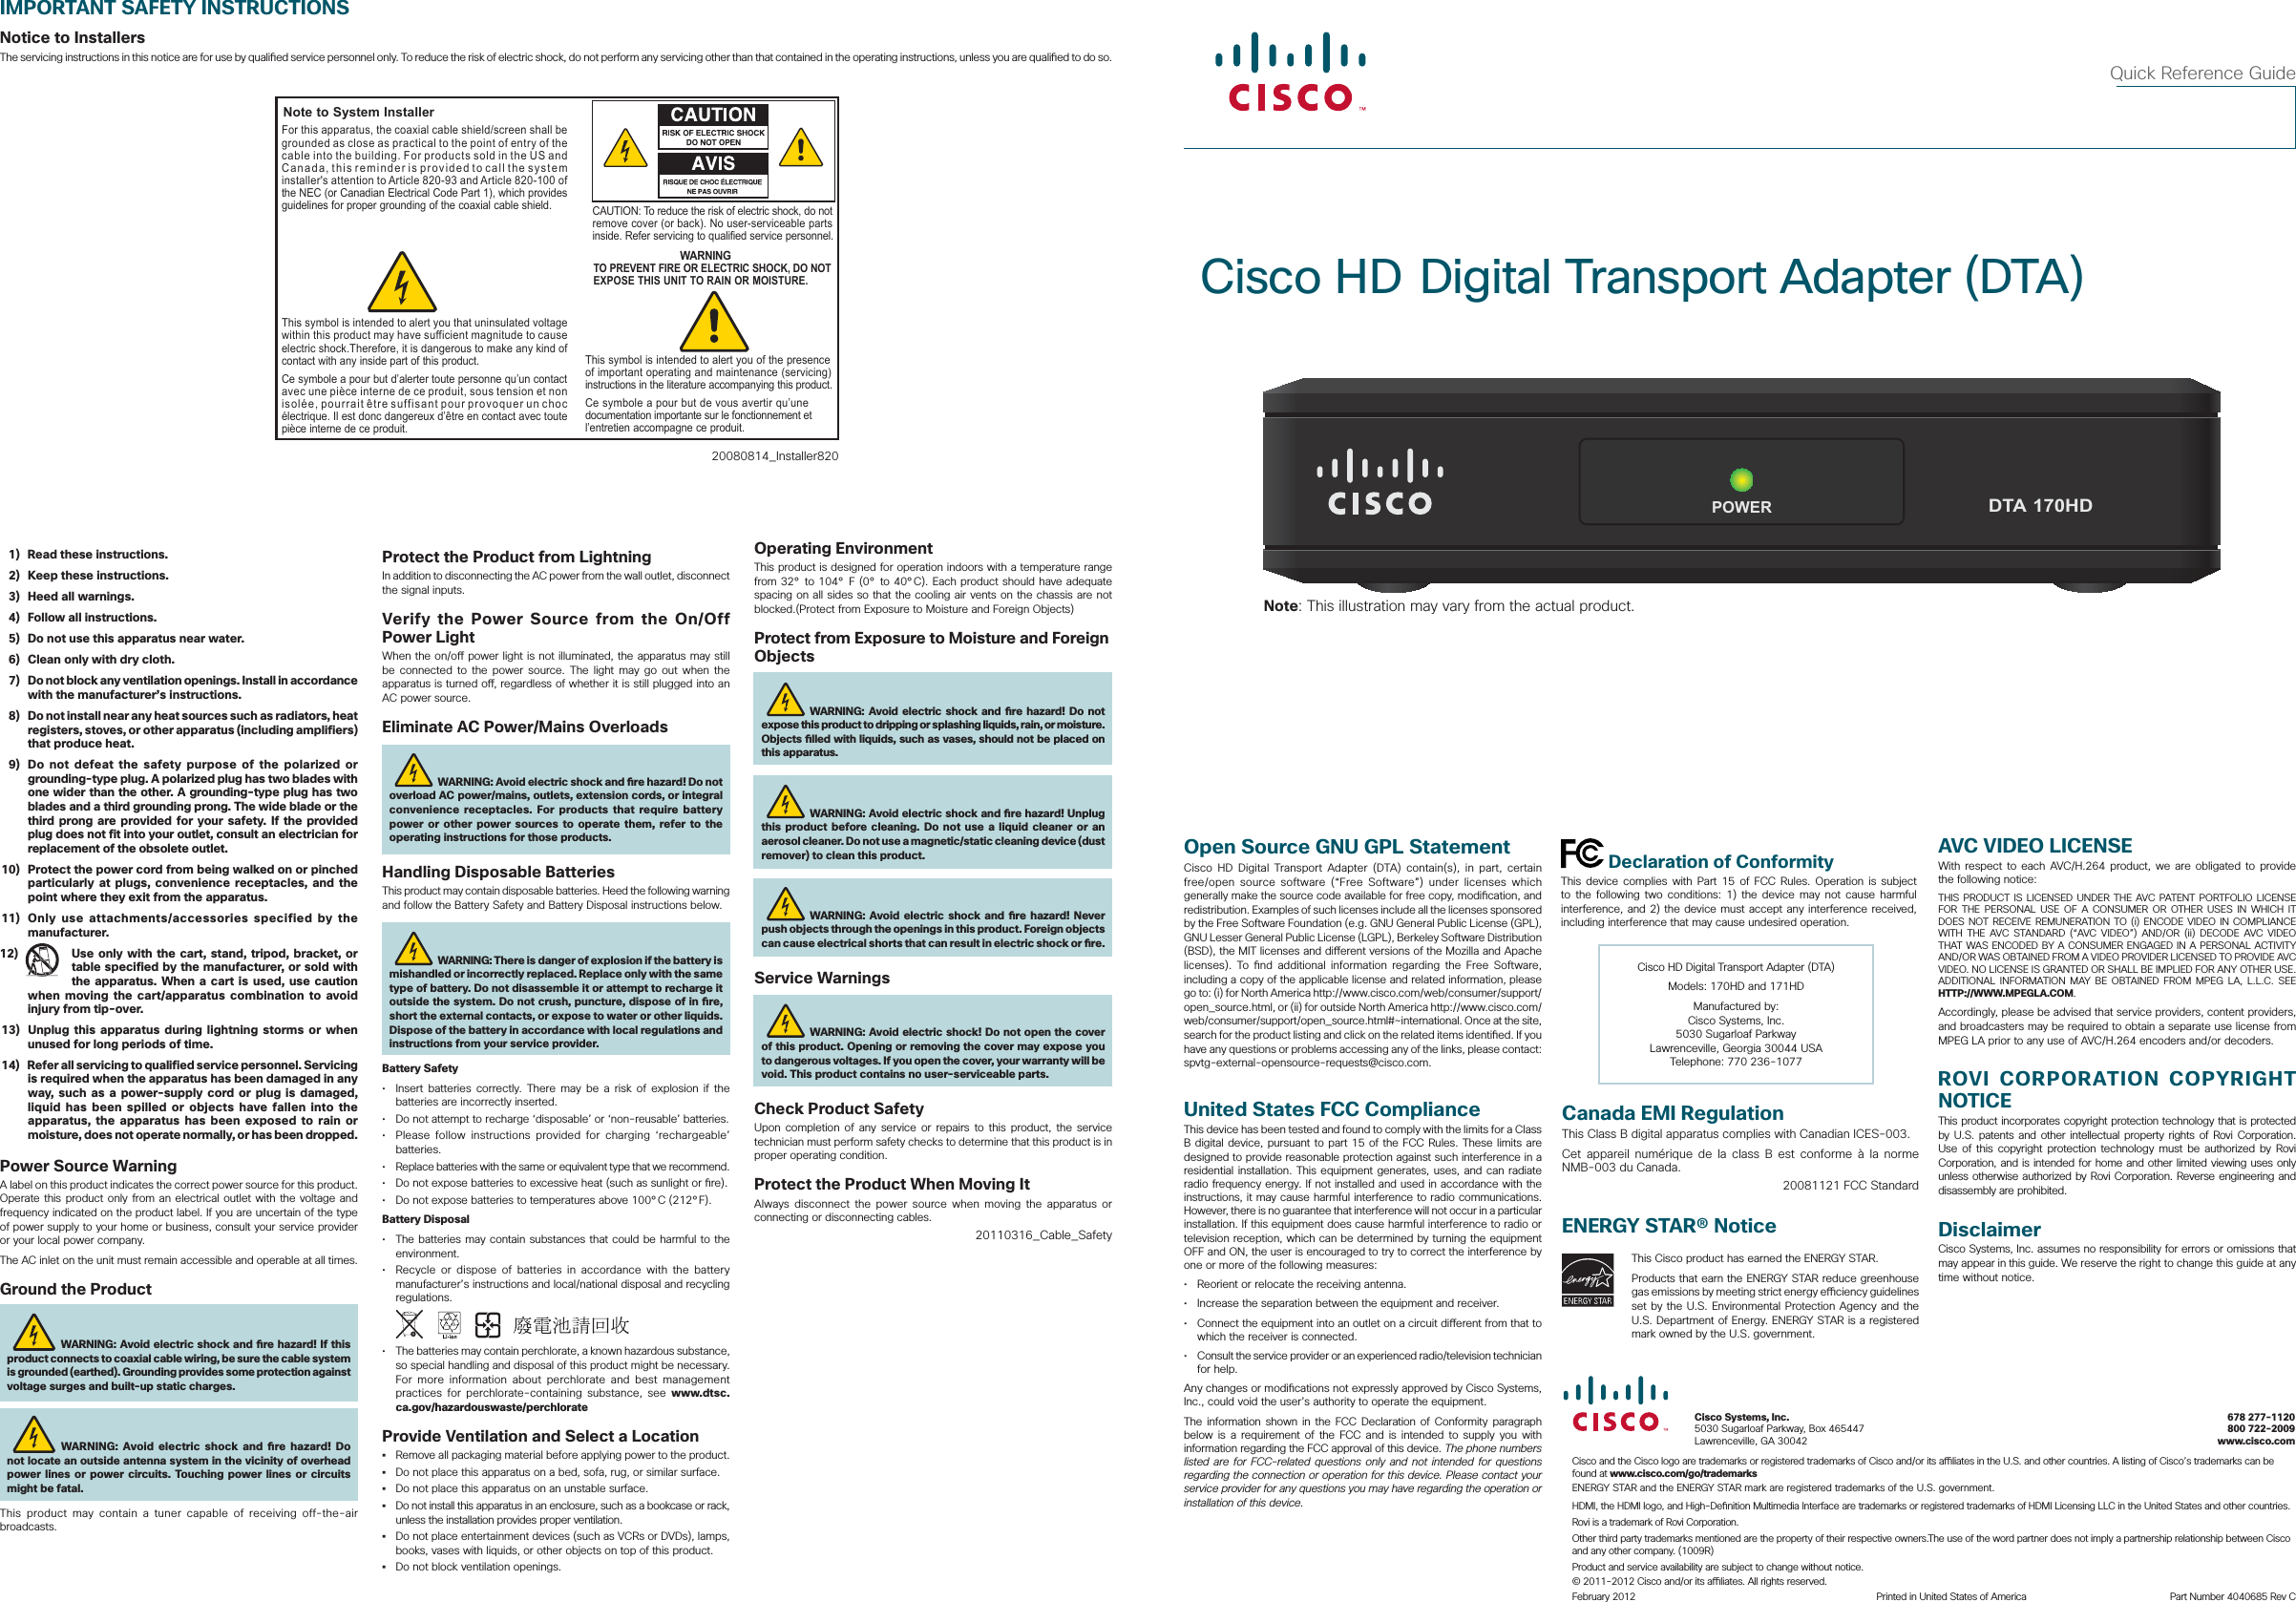 Cisco HD Digital Transport Adapter (DTA)Quick Reference GuideIMPORTANT SAFETY INSTRUCTIONSNotice to InstallersThe servicing instructions in this notice are for use by quali ed service personnel only. To reduce the risk of electric shock, do not perform any servicing other than that contained in the operating instructions, unless you are quali ed to do so.20080814_Installer820Note to System InstallerCAUTION: To reduce the risk of electric shock, do notremove cover (or back). No user-serviceable parts inside. Refer servicing to qualified service personnel.WARNINGTO PREVENT FIRE OR ELECTRIC SHOCK, DO NOT EXPOSE THIS UNIT TO RAIN OR MOISTURE.For this apparatus, the coaxial cable shield/screen shall be grounded as close as practical to the point of entry of the cable into the building. For products sold in the US and Canada, this reminder is provided to call the system installer&apos;s attention to Article 820-93 and Article 820-100 of the NEC (or Canadian Electrical Code Part 1), which provides guidelines for proper grounding of the coaxial cable shield.This symbol is intended to alert you that uninsulated voltage within this product may have sufficient magnitude to cause electric shock.Therefore, it is dangerous to make any kind of contact with any inside part of this product.Ce symbole a pour but d’alerter toute personne qu’un contact avec une pièce interne de ce produit, sous tension et non isolée, pourrait être suffisant pour provoquer un choc électrique. Il est donc dangereux d’être en contact avec toute pièce interne de ce produit.This symbol is intended to alert you of the presence of important operating and maintenance (servicing) instructions in the literature accompanying this product.  Ce symbole a pour but de vous avertir qu’une documentation importante sur le fonctionnement et l’entretien accompagne ce produit.  1)  Read these instructions.  2)  Keep these instructions.  3)  Heed all warnings.  4)  Follow all instructions.  5)  Do not use this apparatus near water.  6)  Clean only with dry cloth.  7)  Do not block any ventilation openings. Install in accordance with the manufacturer’s instructions.  8)  Do not install near any heat sources such as radiators, heat registers, stoves, or other apparatus (including amplifiers) that produce heat.  9)  Do not defeat the safety purpose of the polarized or grounding-type plug. A polarized plug has two blades with one wider than the other. A grounding-type plug has two blades and a third grounding prong. The wide blade or the third prong are provided for your safety. If the provided plug does not fit into your outlet, consult an electrician for replacement of the obsolete outlet. 10)  Protect the power cord from being walked on or pinched particularly at plugs, convenience receptacles, and the point where they exit from the apparatus. 11)  Only use attachments/accessories specified by the manufacturer.12)  Use only with the cart, stand, tripod, bracket, or table specified by the manufacturer, or sold with the apparatus. When a cart is used, use caution when moving the cart/apparatus combination to avoid injury from tip-over. 13)  Unplug  this apparatus during lightning storms or when unused for long periods of time. 14)  Refer all servicing to qualified service personnel. Servicing is required when the apparatus has been damaged in any way, such as a power-supply cord or plug is damaged, liquid has been spilled or objects have fallen into the apparatus, the apparatus has been exposed to rain or moisture, does not operate normally, or has been dropped.Power Source WarningA label on this product indicates the correct power source for this product. Operate this product only from an electrical outlet with the voltage and frequency indicated on the product label. If you are uncertain of the type of power supply to your home or business, consult your service provider or your local power company.The AC inlet on the unit must remain accessible and operable at all times.Ground the ProductWARNING: Avoid electric shock and  re hazard! If this product connects to coaxial cable wiring, be sure the cable system is grounded (earthed). Grounding provides some protection against voltage surges and built-up static charges.WARNING: Avoid electric shock and  re hazard! Do not locate an outside antenna system in the vicinity of overhead power lines or power circuits. Touching power lines or circuits might be fatal.This product may contain a tuner capable of receiving off-the-air broadcasts.Operating EnvironmentThis product is designed for operation indoors with a temperature range from 32° to 104° F (0° to 40°C). Each product should have adequate spacing on all sides so that the cooling air vents on the chassis are not blocked.(Protect from Exposure to Moisture and Foreign Objects)Protect from Exposure to Moisture and Foreign ObjectsWARNING: Avoid electric shock and  re hazard! Do not expose this product to dripping or splashing liquids, rain, or moisture. Objects  lled with liquids, such as vases, should not be placed on this apparatus.WARNING: Avoid electric shock and  re hazard! Unplug this product before cleaning. Do not use a liquid cleaner or an aerosol cleaner. Do not use a magnetic/static cleaning device (dust remover) to clean this product.WARNING: Avoid electric shock and  re hazard! Never push objects through the openings in this product. Foreign objects can cause electrical shorts that can result in electric shock or  re. Service WarningsWARNING: Avoid electric shock! Do not open the cover of this product. Opening or removing the cover may expose you to dangerous voltages. If you open the cover, your warranty will be void. This product contains no user-serviceable parts.Check Product SafetyUpon completion of any service or repairs to this product, the service technician must perform safety checks to determine that this product is in proper operating condition.Protect the Product When Moving ItAlways disconnect the power source when moving the apparatus or connecting or disconnecting cables. 20110316_Cable_SafetyCisco HD Digital Transport Adapter (DTA)Models: 170HD and 171HDManufactured by:Cisco Systems, Inc. 5030 Sugarloaf Parkway Lawrenceville, Georgia 30044 USATelephone: 770 236-1077Open Source GNU GPL StatementCisco HD Digital Transport Adapter (DTA) contain(s), in part, certain free/open source software (“Free Software”) under licenses which generally make the source code available for free copy, modi cation, and redistribution. Examples of such licenses include all the licenses sponsored by the Free Software Foundation (e.g. GNU General Public License (GPL), GNU Lesser General Public License (LGPL), Berkeley Software Distribution (BSD), the MIT licenses and di erent versions of the Mozilla and Apache licenses). To  nd additional information regarding the Free Software, including a copy of the applicable license and related information, please go to: (i) for North America http://www.cisco.com/web/consumer/support/open_source.html, or (ii) for outside North America http://www.cisco.com/web/consumer/support/open_source.html#~international. Once at the site, search for the product listing and click on the related items identi ed. If you have any questions or problems accessing any of the links, please contact: spvtg-external-opensource-requests@cisco.com.United States FCC ComplianceThis device has been tested and found to comply with the limits for a Class B digital device, pursuant to part 15 of the FCC Rules. These limits are designed to provide reasonable protection against such interference in a residential installation. This equipment generates, uses, and can radiate radio frequency energy. If not installed and used in accordance with the instructions, it may cause harmful interference to radio communications. However, there is no guarantee that interference will not occur in a particular installation. If this equipment does cause harmful interference to radio or television reception, which can be determined by turning the equipment OFF and ON, the user is encouraged to try to correct the interference by one or more of the following measures:•  Reorient or relocate the receiving antenna.•  Increase the separation between the equipment and receiver.•  Connect the equipment into an outlet on a circuit di erent from that to which the receiver is connected.•  Consult the service provider or an experienced radio/television technician for help.Any changes or modi cations not expressly approved by Cisco Systems, Inc., could void the user’s authority to operate the equipment.The information shown in the FCC Declaration of Conformity paragraph below is a requirement of the FCC and is intended to supply you with information regarding the FCC approval of this device. The phone numbers listed are for FCC-related questions only and not intended for questions regarding the connection or operation for this device. Please contact your service provider for any questions you may have regarding the operation or installation of this device. Declaration of ConformityThis device complies with Part 15 of FCC Rules. Operation is subject to the following two conditions: 1) the device may not cause harmful interference, and 2) the device must accept any interference received, including interference that may cause undesired operation.AVC VIDEO LICENSEWith respect to each AVC/H.264 product, we are obligated to provide the following notice:THIS PRODUCT IS LICENSED UNDER THE AVC PATENT PORTFOLIO LICENSE FOR THE PERSONAL USE OF A CONSUMER OR OTHER USES IN WHICH IT DOES NOT RECEIVE REMUNERATION TO (i) ENCODE VIDEO IN COMPLIANCE WITH THE AVC STANDARD (“AVC VIDEO”) AND/OR (ii) DECODE AVC VIDEO THAT WAS ENCODED BY A CONSUMER ENGAGED IN A PERSONAL ACTIVITY AND/OR WAS OBTAINED FROM A VIDEO PROVIDER LICENSED TO PROVIDE AVC VIDEO. NO LICENSE IS GRANTED OR SHALL BE IMPLIED FOR ANY OTHER USE. ADDITIONAL INFORMATION MAY BE OBTAINED FROM MPEG LA, L.L.C. SEE HTTP://WWW.MPEGLA.COM.Accordingly, please be advised that service providers, content providers, and broadcasters may be required to obtain a separate use license from MPEG LA prior to any use of AVC/H.264 encoders and/or decoders.ROVI CORPORATION COPYRIGHT NOTICEThis product incorporates copyright protection technology that is protected by U.S. patents and other intellectual property rights of Rovi Corporation. Use of this copyright protection technology must be authorized by Rovi Corporation, and is intended for home and other limited viewing uses only unless otherwise authorized by Rovi Corporation. Reverse engineering and disassembly are prohibited.DisclaimerCisco Systems, Inc. assumes no responsibility for errors or omissions that may appear in this guide. We reserve the right to change this guide at any time without notice.Protect the Product from LightningIn addition to disconnecting the AC power from the wall outlet, disconnect the signal inputs.Verify the Power Source from the On/Off Power LightWhen the on/o  power light is not illuminated, the apparatus may still be connected to the power source. The light may go out when the apparatus is turned o , regardless of whether it is still plugged into an AC power source. Eliminate AC Power/Mains OverloadsWARNING: Avoid electric shock and  re hazard! Do not overload AC power/mains, outlets, extension cords, or integral convenience receptacles. For products that require battery power or other power sources to operate them, refer to the operating instructions for those products.Handling Disposable BatteriesThis product may contain disposable batteries. Heed the following warning and follow the Battery Safety and Battery Disposal instructions below.WARNING: There is danger of explosion if the battery is mishandled or incorrectly replaced. Replace only with the same type of battery. Do not disassemble it or attempt to recharge it outside the system. Do not crush, puncture, dispose of in  re, short the external contacts, or expose to water or other liquids. Dispose of the battery in accordance with local regulations and instructions from your service provider. Battery Safety•  Insert batteries correctly. There may be a risk of explosion if the batteries are incorrectly inserted.•  Do not attempt to recharge ‘disposable’ or ‘non-reusable’ batteries.•  Please follow instructions provided for charging ‘rechargeable’ batteries.•  Replace batteries with the same or equivalent type that we recommend.•  Do not expose batteries to excessive heat (such as sunlight or  re).•  Do not expose batteries to temperatures above 100°C (212°F).Battery Disposal•  The batteries may contain substances that could be harmful to the environment.•  Recycle or dispose of batteries in accordance with the battery manufacturer’s instructions and local/national disposal and recycling regulations.               •  The batteries may contain perchlorate, a known hazardous substance, so special handling and disposal of this product might be necessary. For more information about perchlorate and best management practices for perchlorate-containing substance, see www.dtsc.ca.gov/hazardouswaste/perchlorateProvide Ventilation and Select a Location•  Remove all packaging material before applying power to the product. •  Do not place this apparatus on a bed, sofa, rug, or similar surface.•  Do not place this apparatus on an unstable surface.•  Do not install this apparatus in an enclosure, such as a bookcase or rack, unless the installation provides proper ventilation.•  Do not place entertainment devices (such as VCRs or DVDs), lamps, books, vases with liquids, or other objects on top of this product.•  Do not block ventilation openings.Canada EMI RegulationThis Class B digital apparatus complies with Canadian ICES-003.Cet appareil numérique de la class B est conforme à la norme NMB-003 du Canada.20081121 FCC StandardENERGY STAR® NoticeThis Cisco product has earned the ENERGY STAR. Products that earn the ENERGY STAR reduce greenhouse gas emissions by meeting strict energy e  ciency guidelines set by the U.S. Environmental Protection Agency and the U.S. Department of Energy. ENERGY STAR is a registered mark owned by the U.S. government.Cisco and the Cisco logo are trademarks or registered trademarks of Cisco and/or its a  liates in the U.S. and other countries. A listing of Cisco’s trademarks can be found at www.cisco.com/go/trademarksENERGY STAR and the ENERGY STAR mark are registered trademarks of the U.S. government.HDMI, the HDMI logo, and High-De nition Multimedia Interface are trademarks or registered trademarks of HDMI Licensing LLC in the United States and other countries.Rovi is a trademark of Rovi Corporation. Other third party trademarks mentioned are the property of their respective owners.The use of the word partner does not imply a partnership relationship between Cisco and any other company. (1009R)Product and service availability are subject to change without notice.© 2011-2012 Cisco and/or its a  liates. All rights reserved.February 2012     Printed in United States of America  Part Number 4040685 Rev CPOWERDTA 170HDCisco Systems, Inc. 678 277-11205030 Sugarloaf Parkway, Box 465447   800 722-2009Lawrenceville, GA 30042  www.cisco.comNote: This illustration may vary from the actual product.